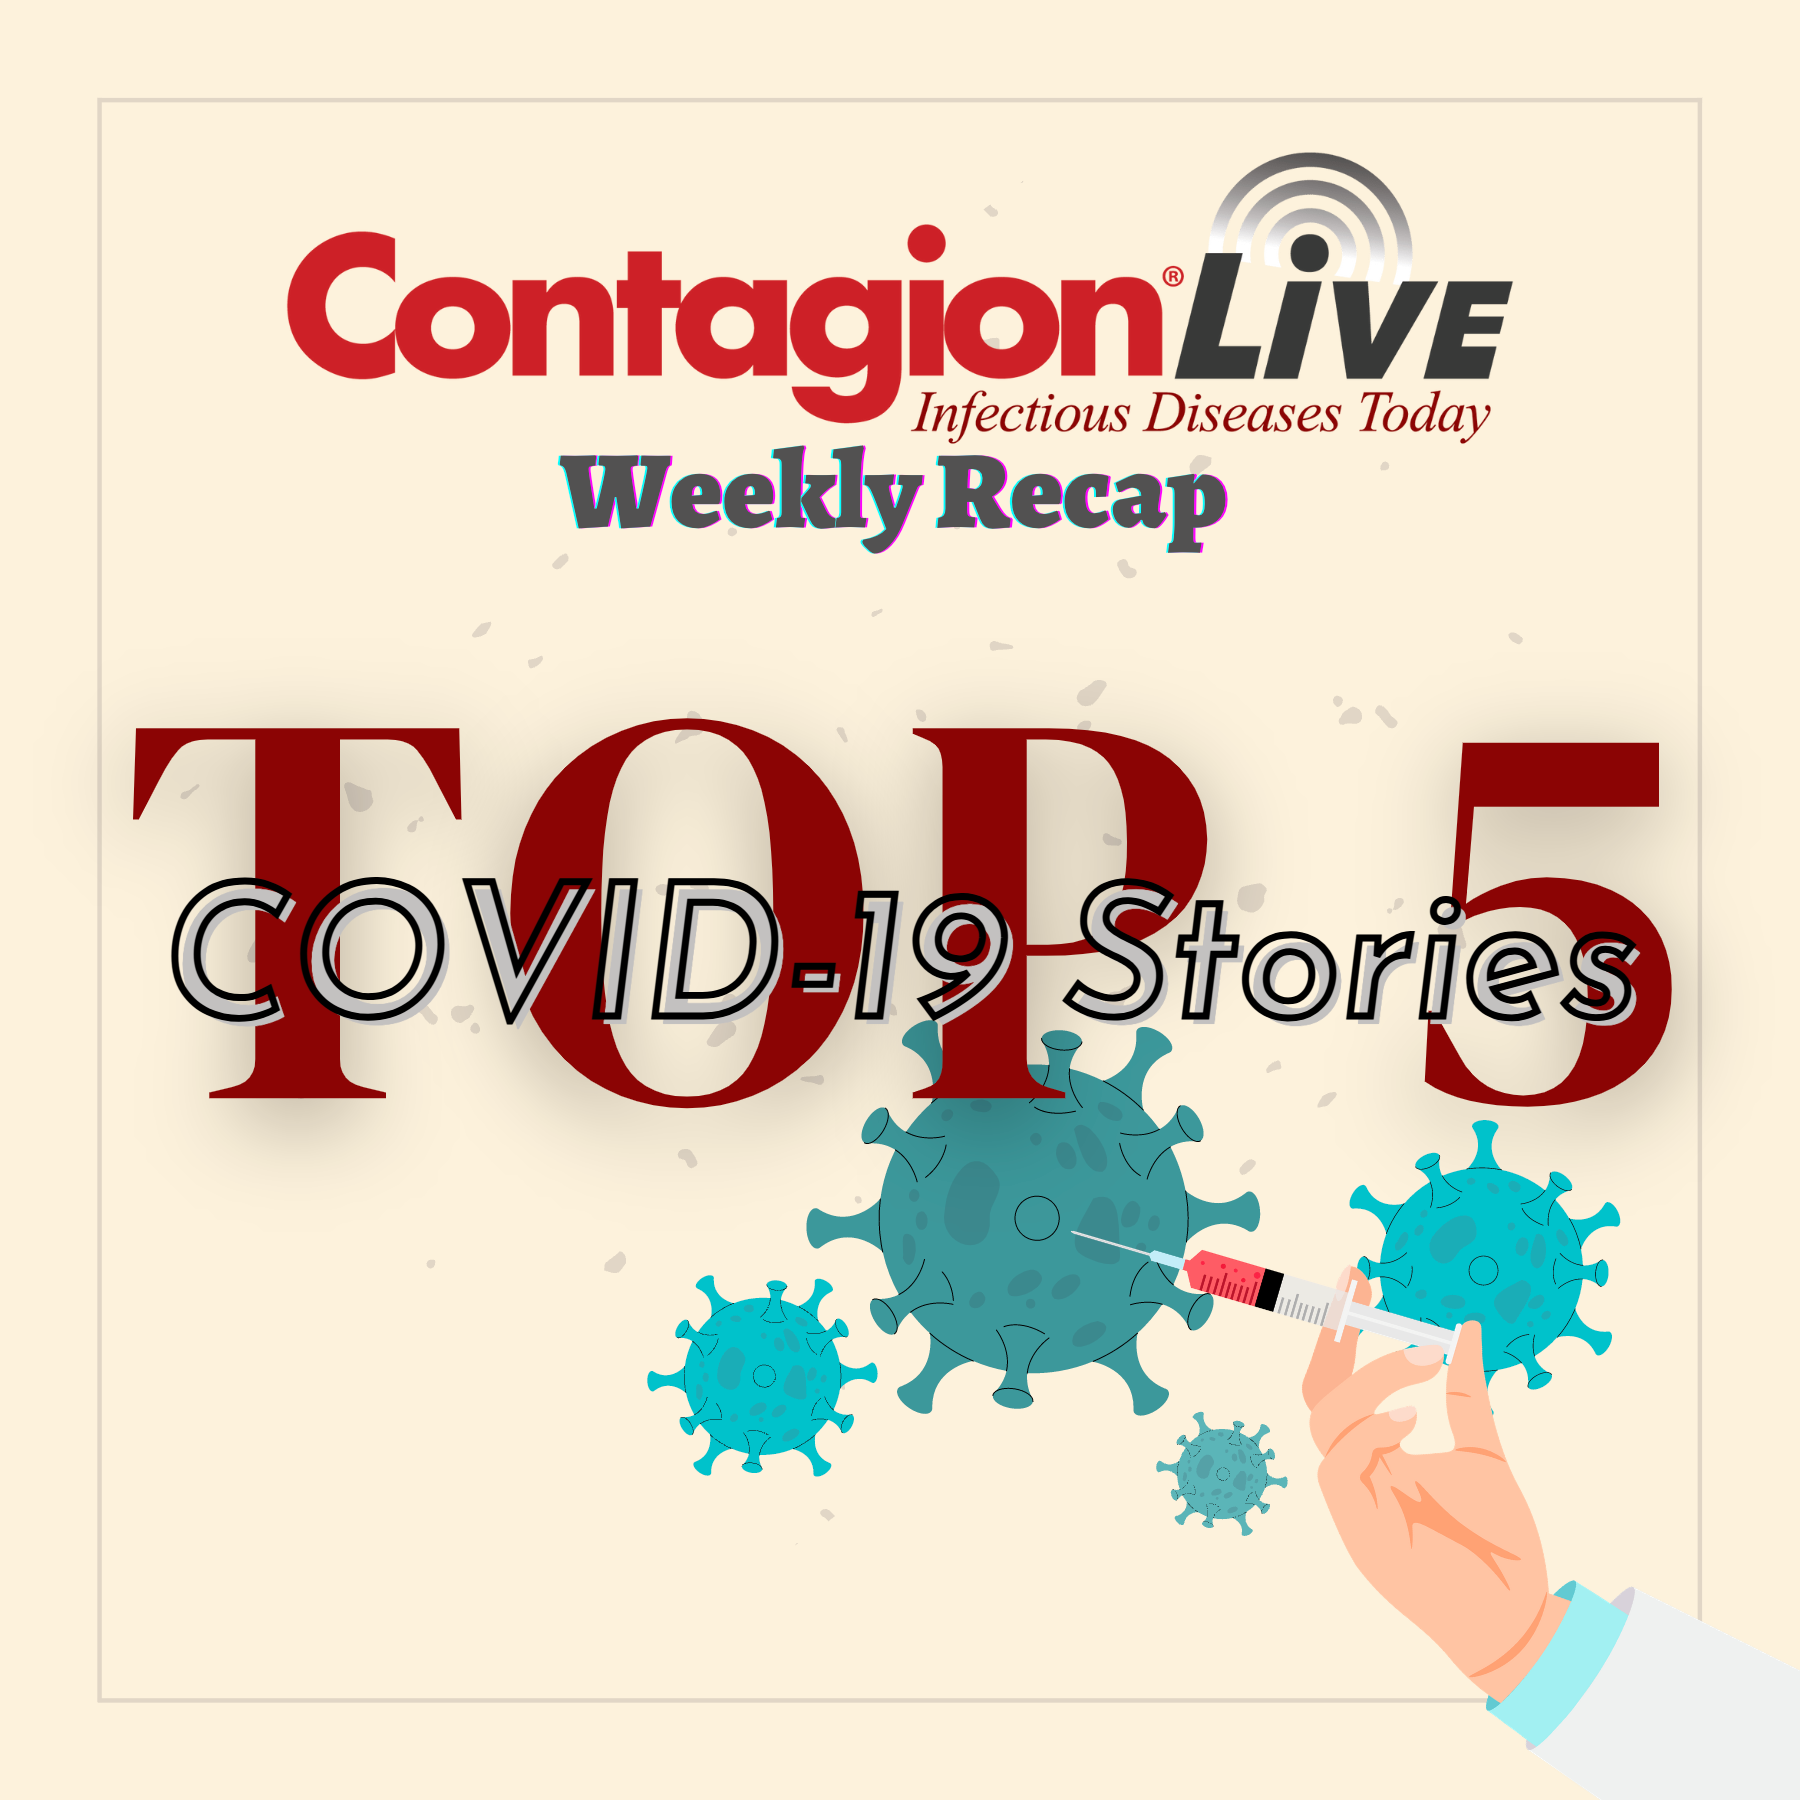 The week's most-clicked COVID-19 stories included vaccine updates, new variants, and a pivotal FDA advisory committee vote.